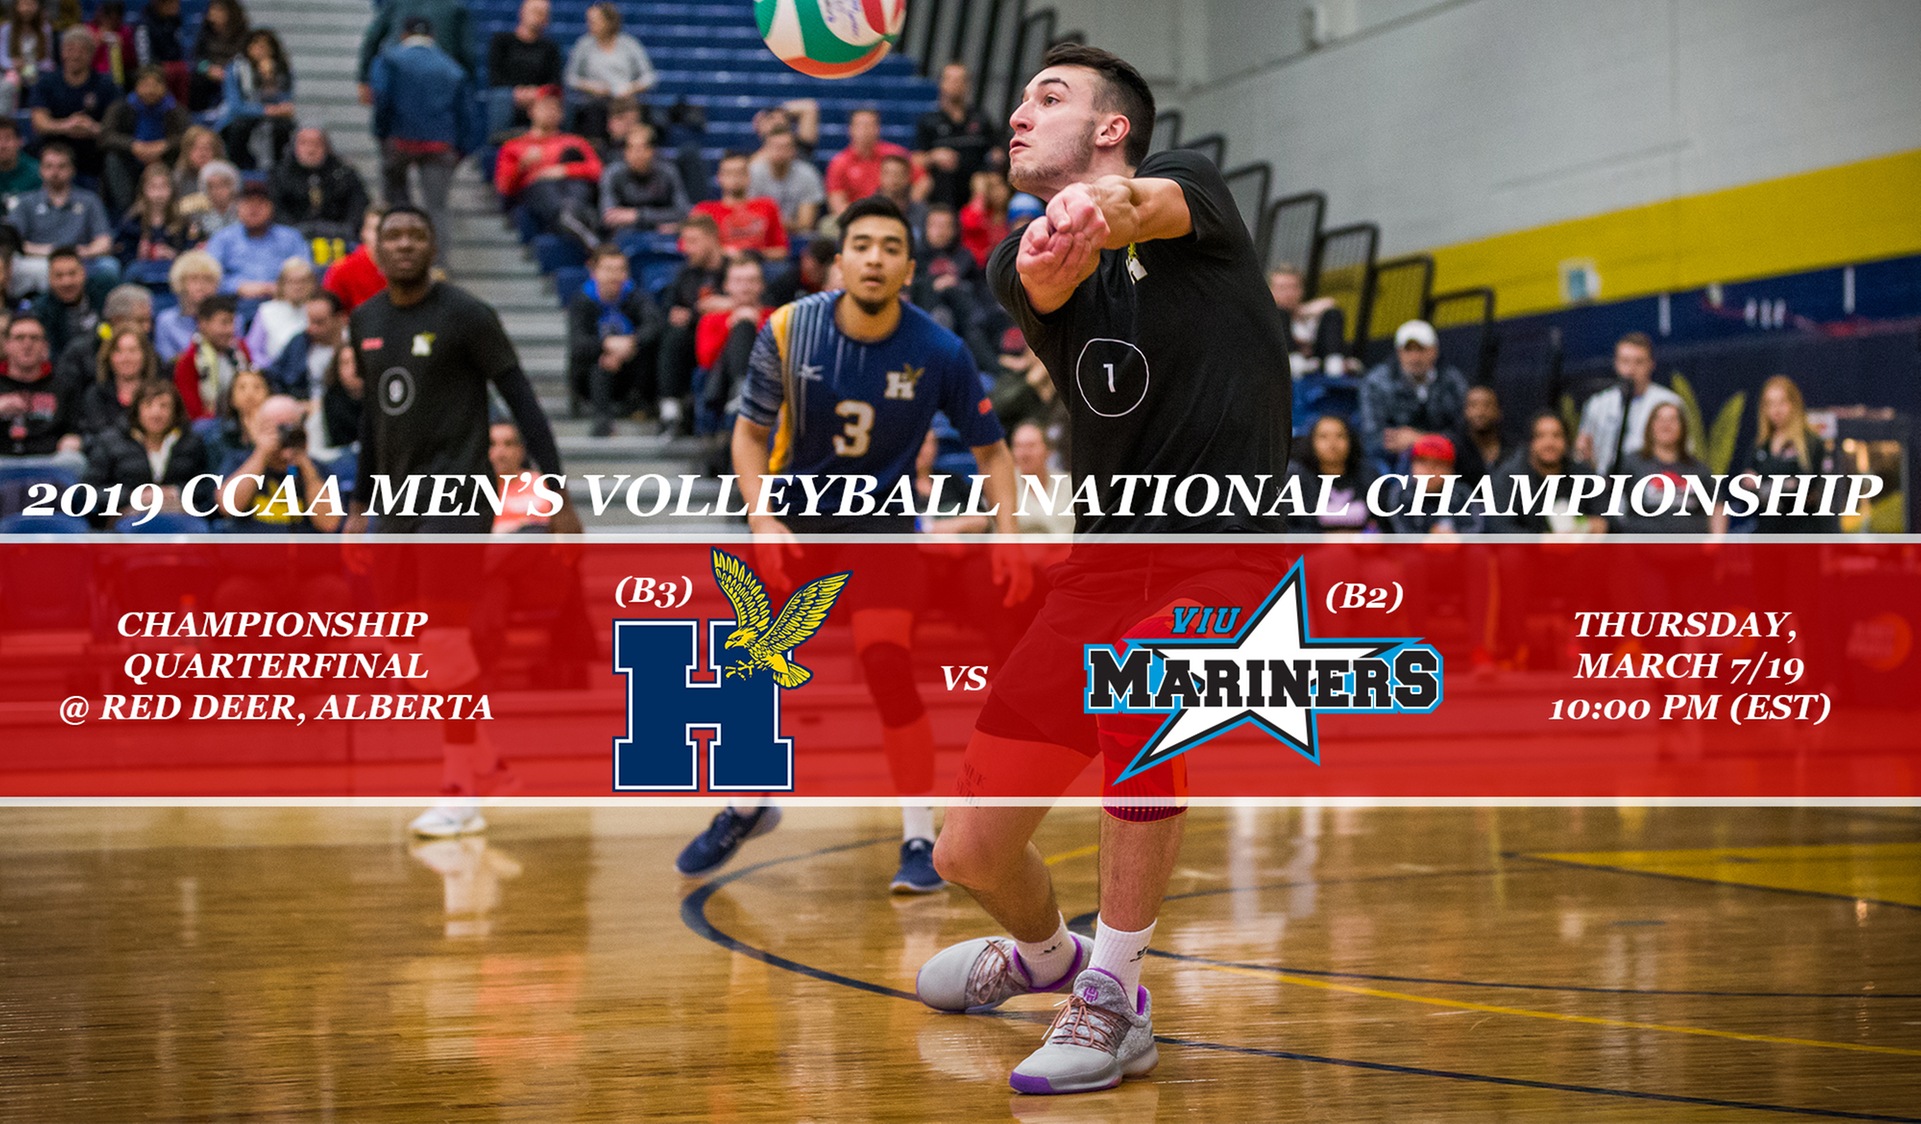 HAWKS OPEN QUEST FOR 2019 CCAA NATIONAL TITLE ON MARCH 7 VS VIU